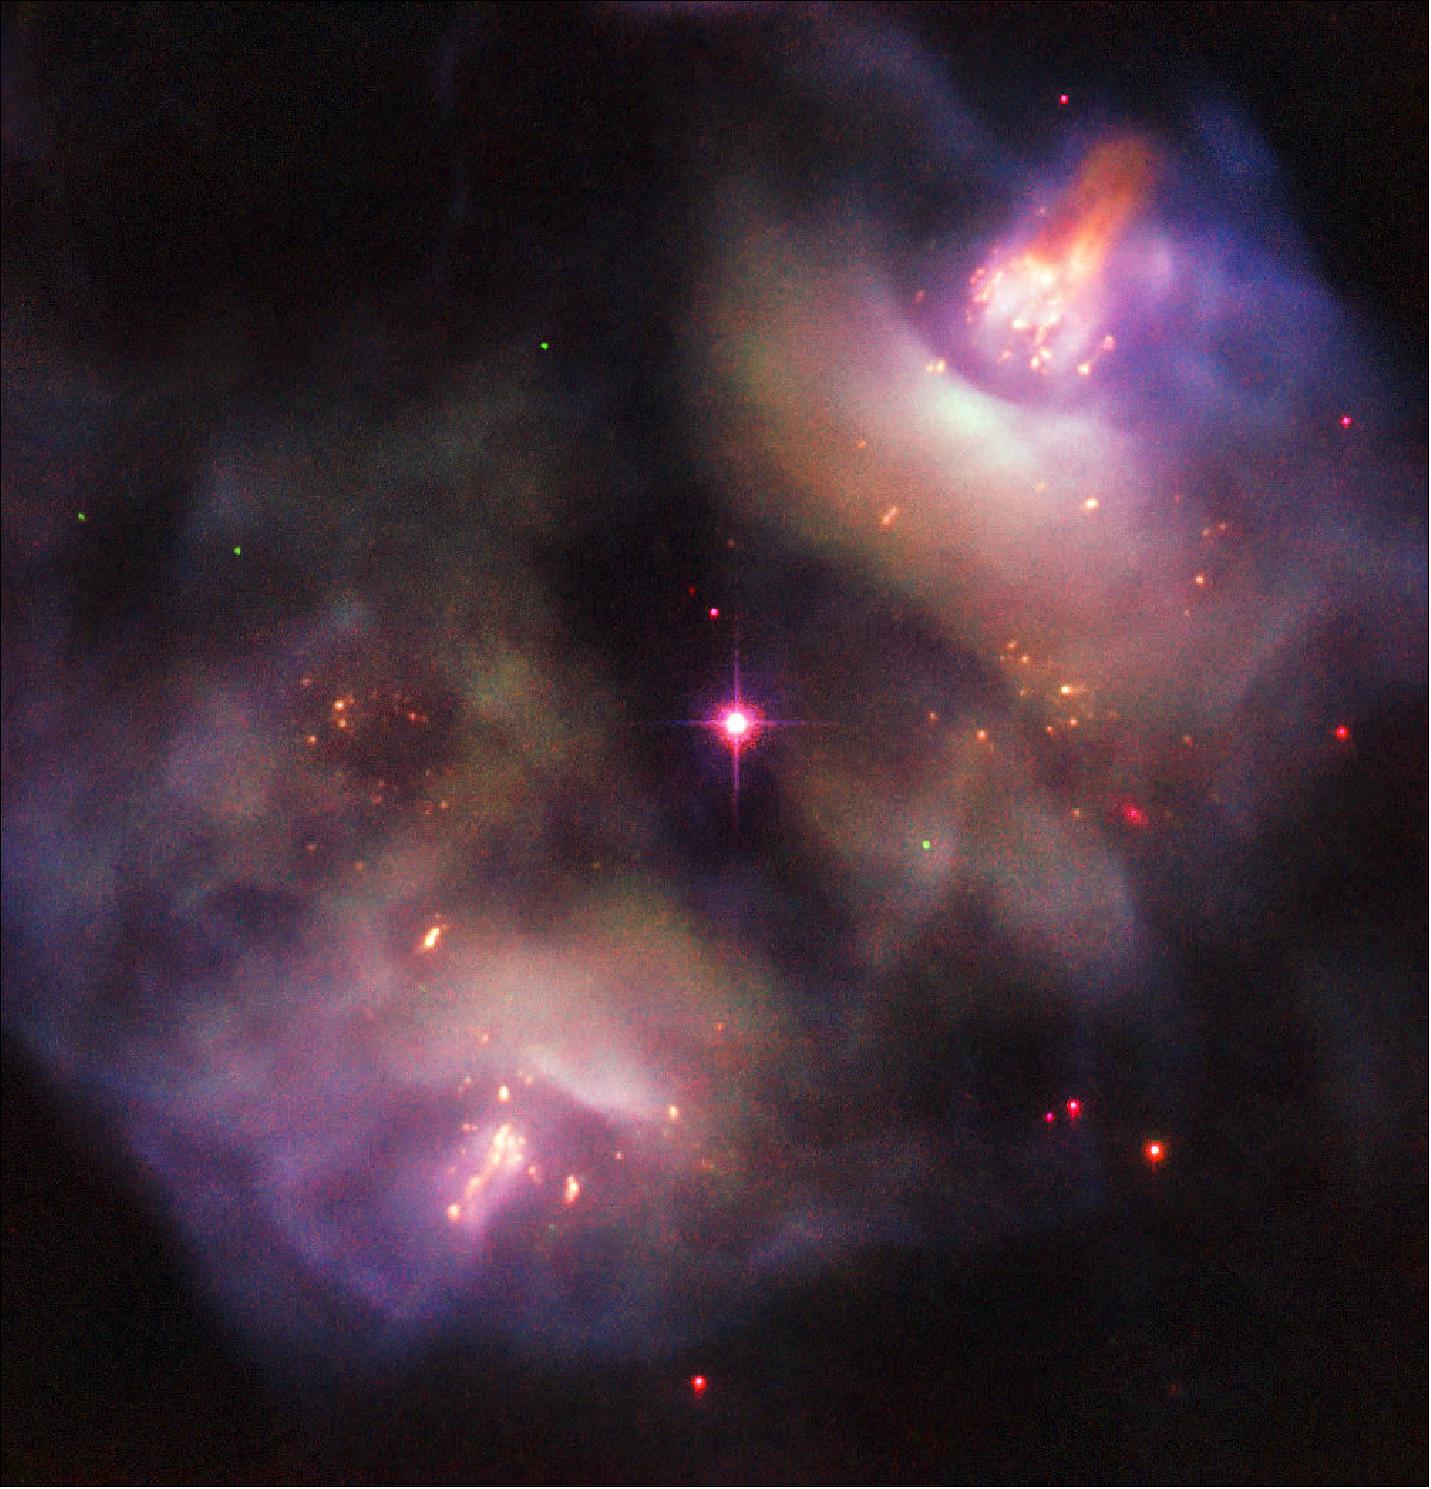 Figure 30: Two lobes are visible to the upper right and lower left of the frame, and together form something known as a planetary nebula. Despite the name, such nebulae have nothing to do with planets; NGC 2371/2 formed when a Sun-like star reached the end of its life and blasted off its outer layers, shedding the constituent material and pushing it out into space to leave just a superheated stellar remnant behind. This remnant is visible as the orange-tinted star at the center of the frame, sitting neatly between the two lobes (image credit: ESA/Hubble & NASA, R. Wade et al.; CC BY 4.0)